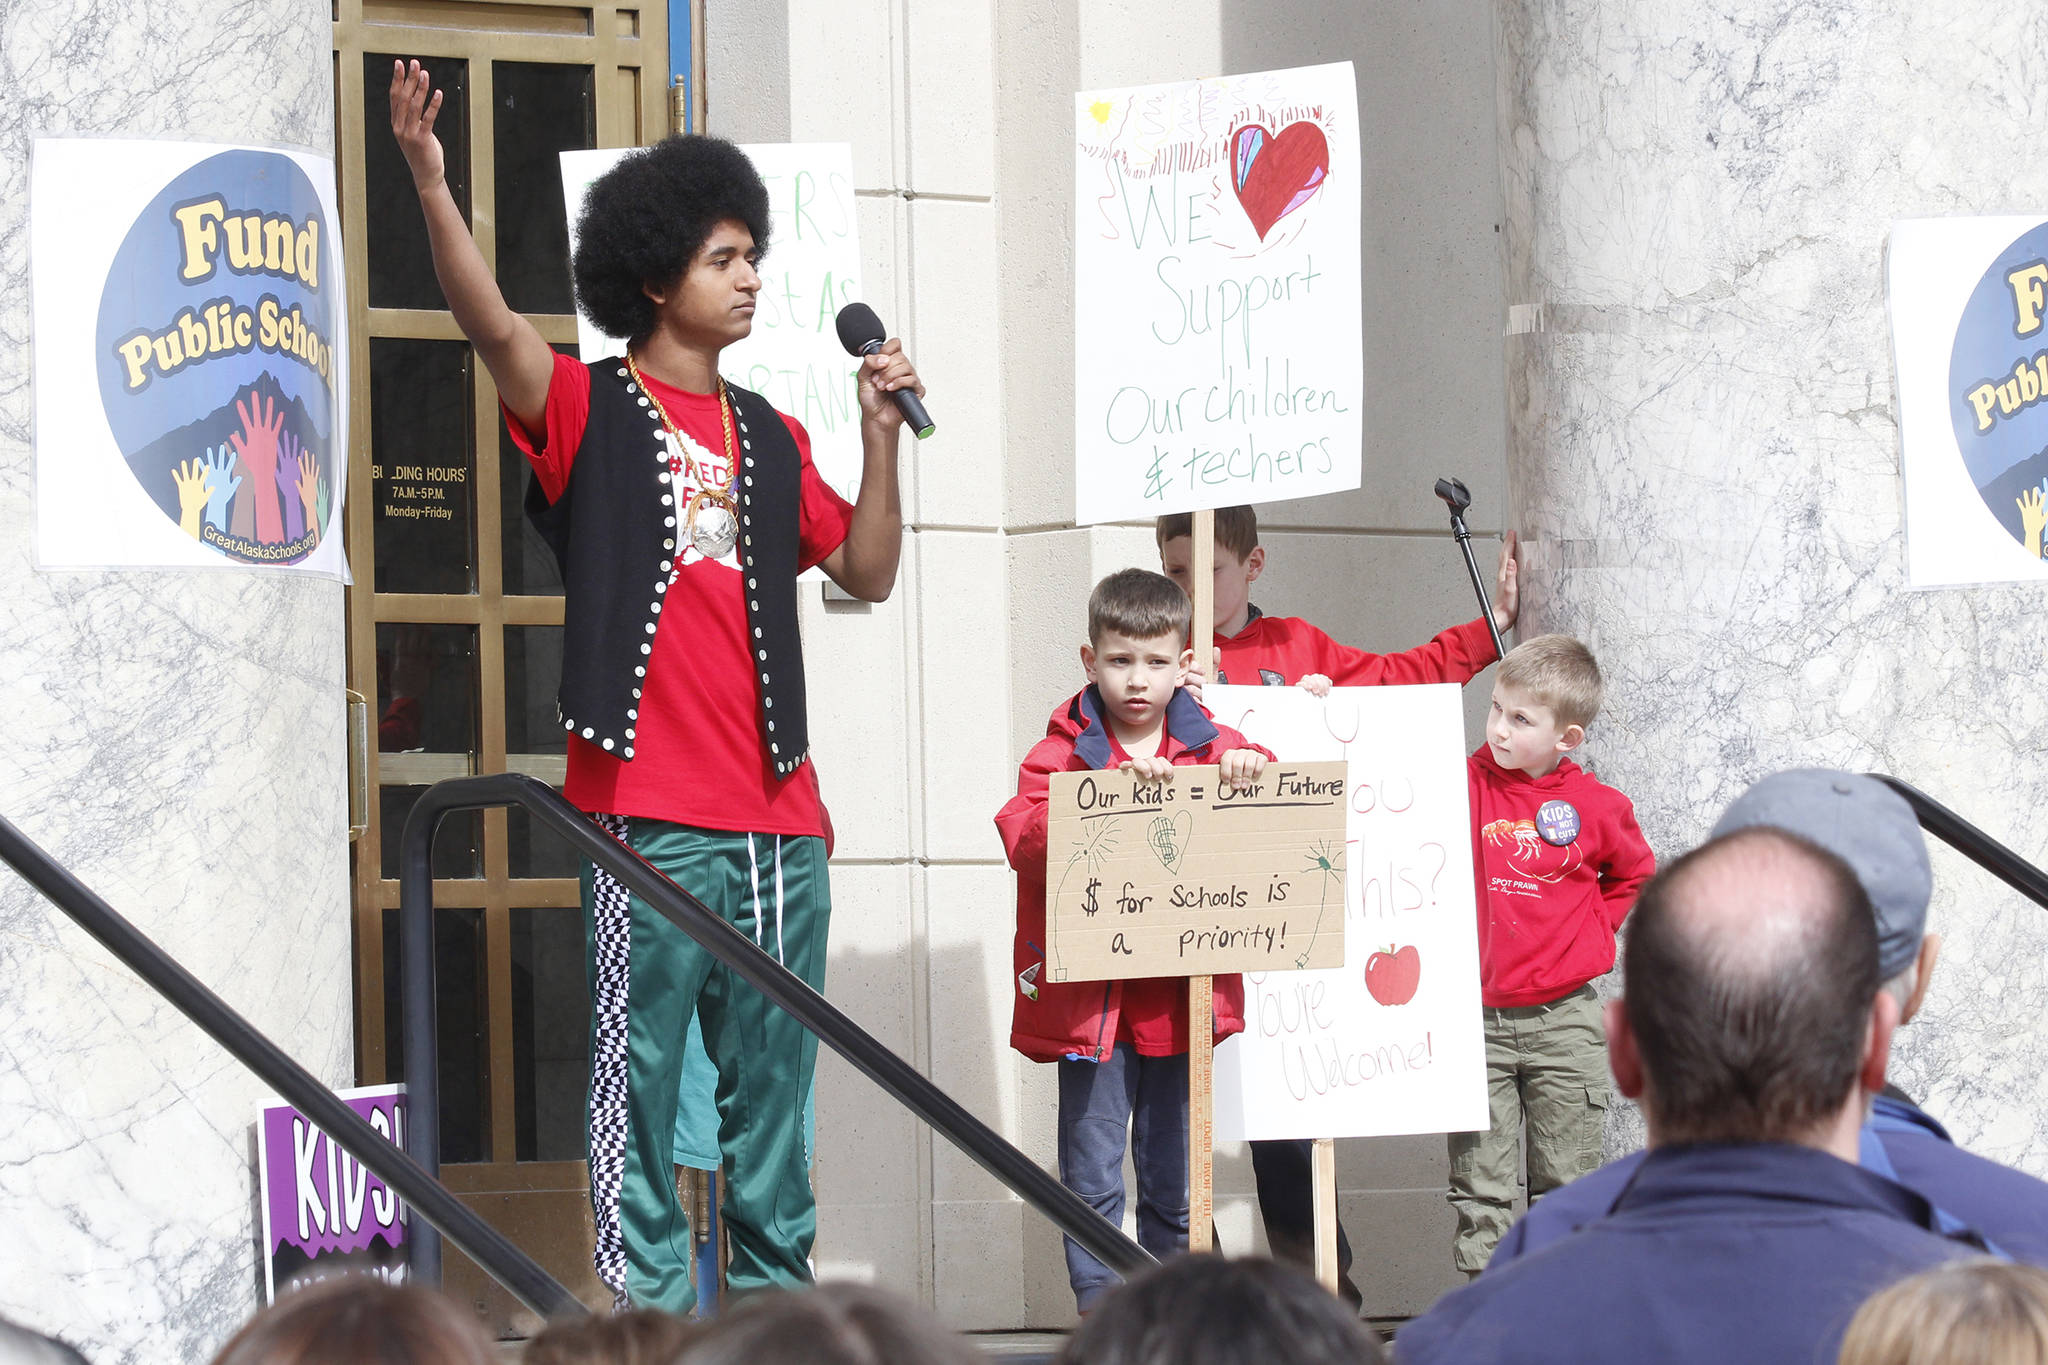 Juneau-Douglas High School senior Arias Hoyle speaks at the Fund Our Future rally on the steps of the Alaska State Capitol on Saturday. (Alex McCarthy | Juneau Empire)